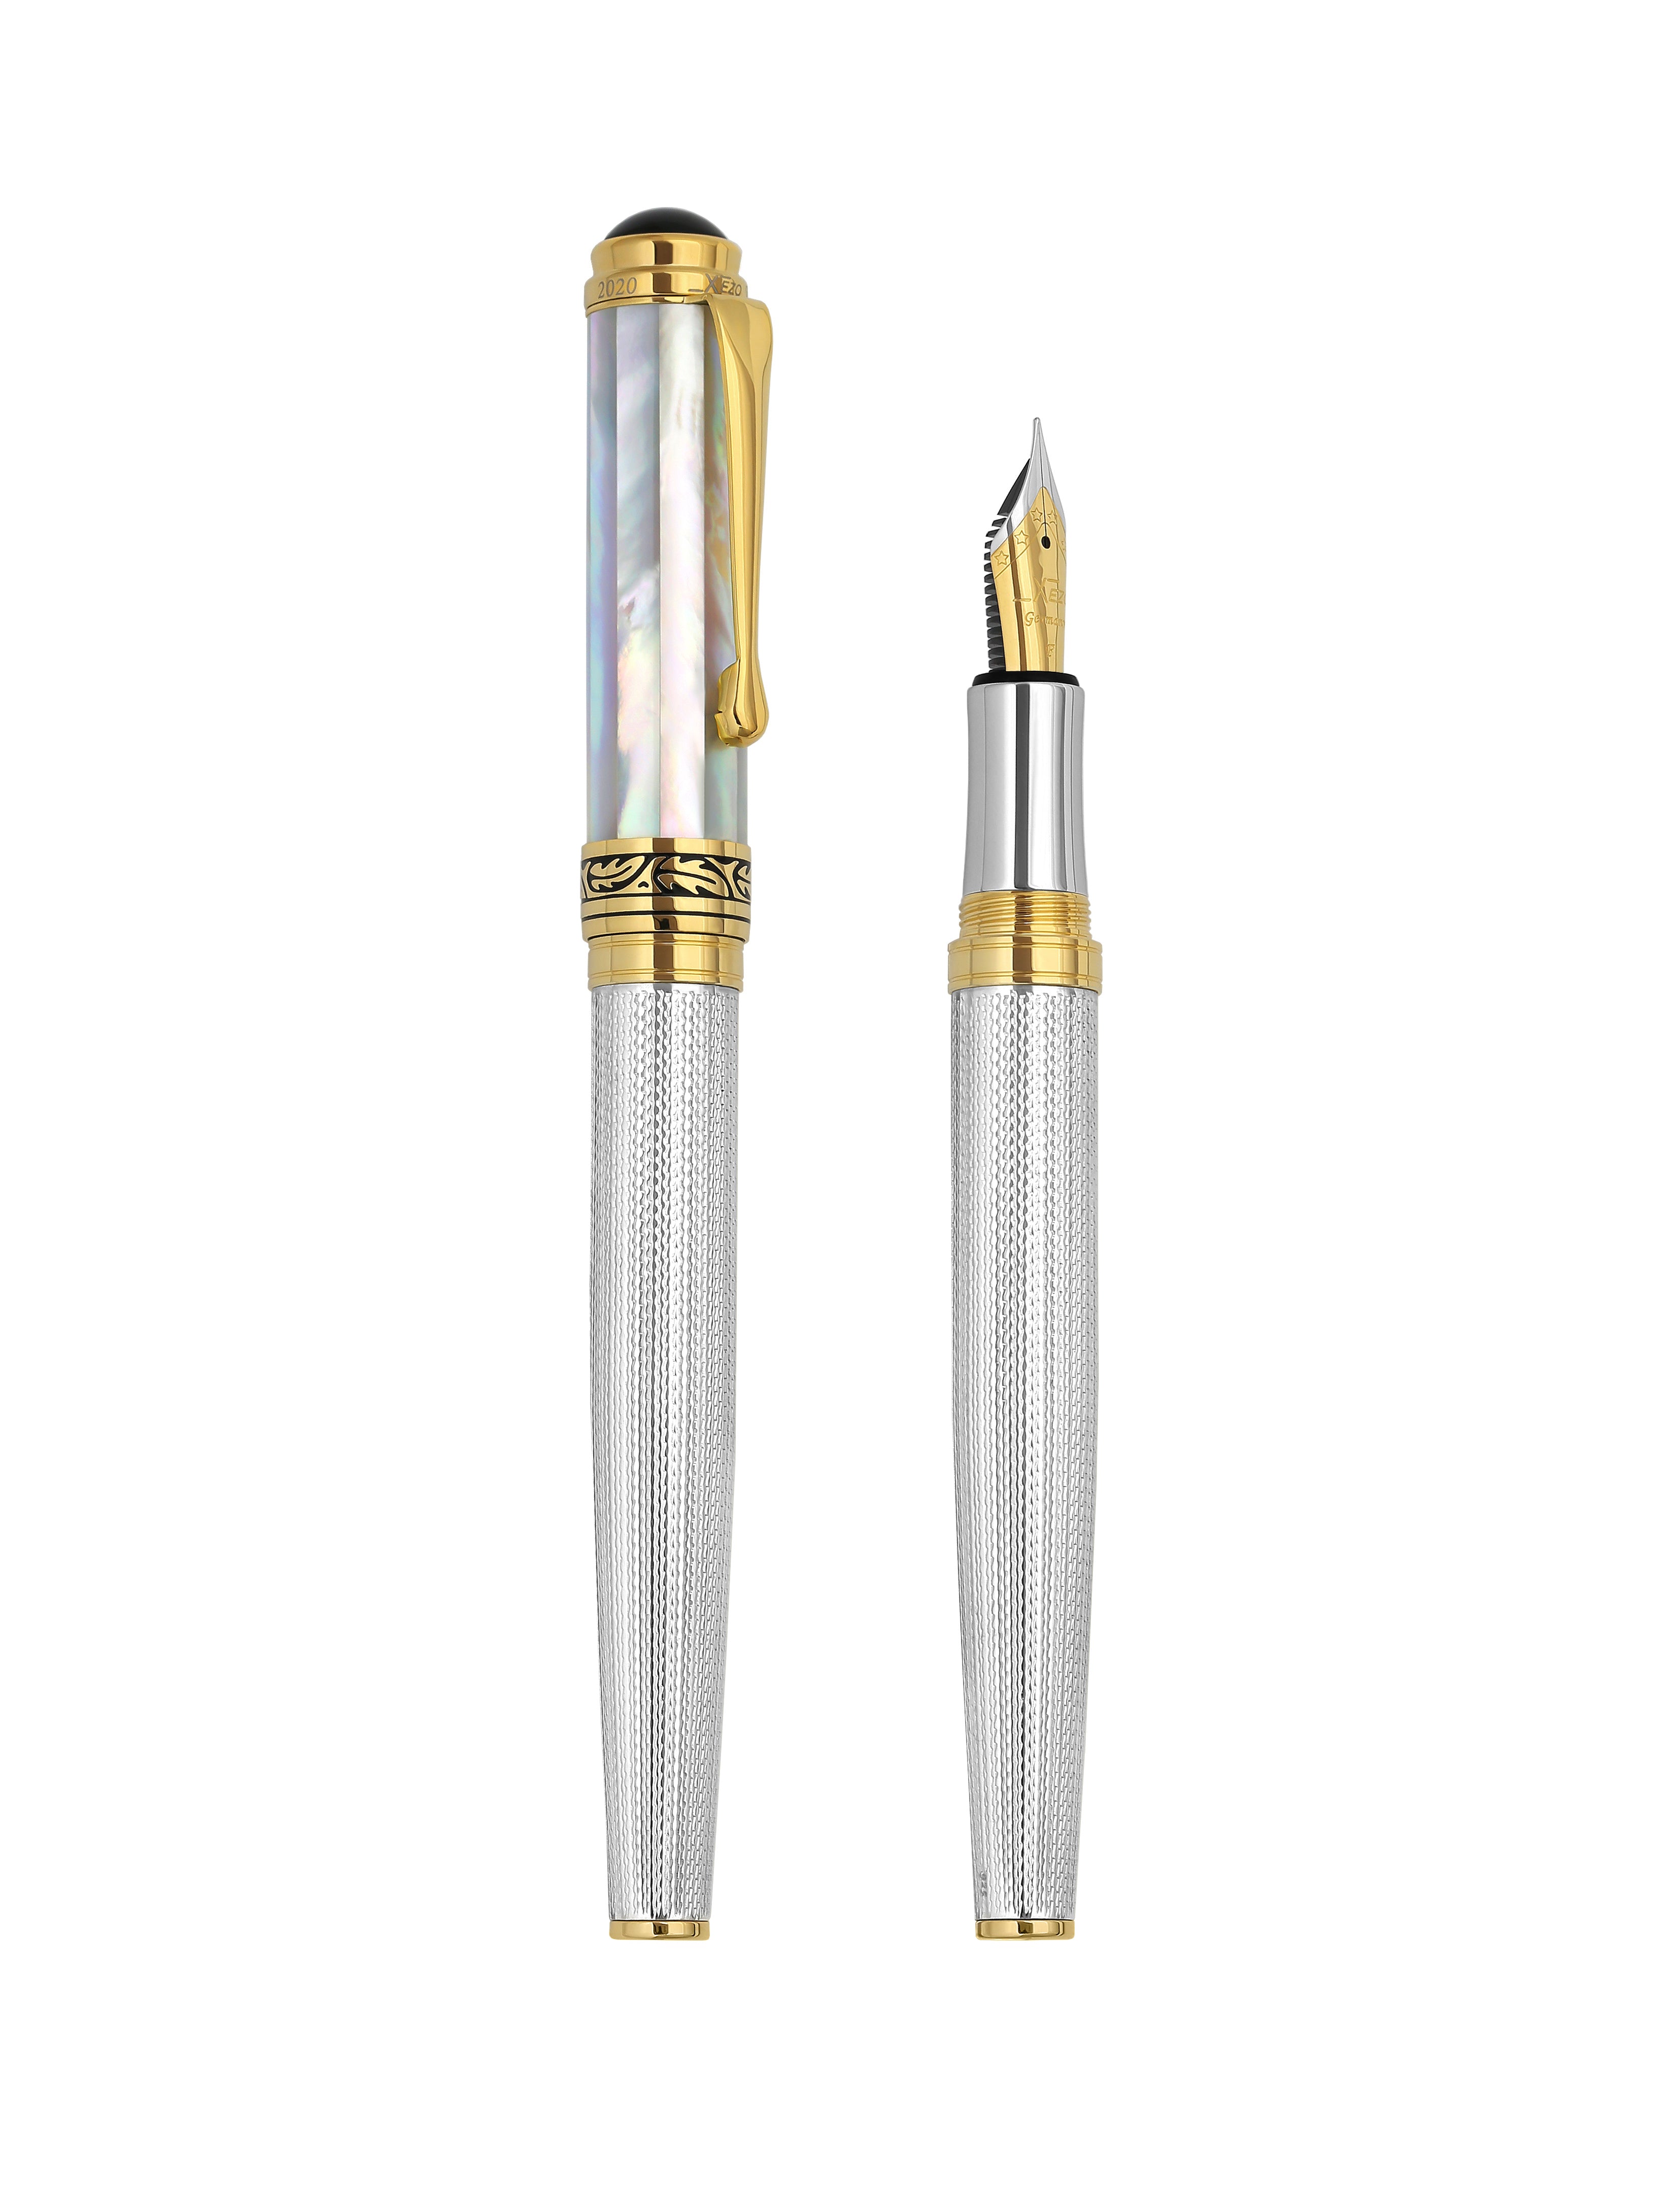 Xezo Maestro Fine Point Rollerball Pen. Handcrafted with Black Mother of Pe - 3